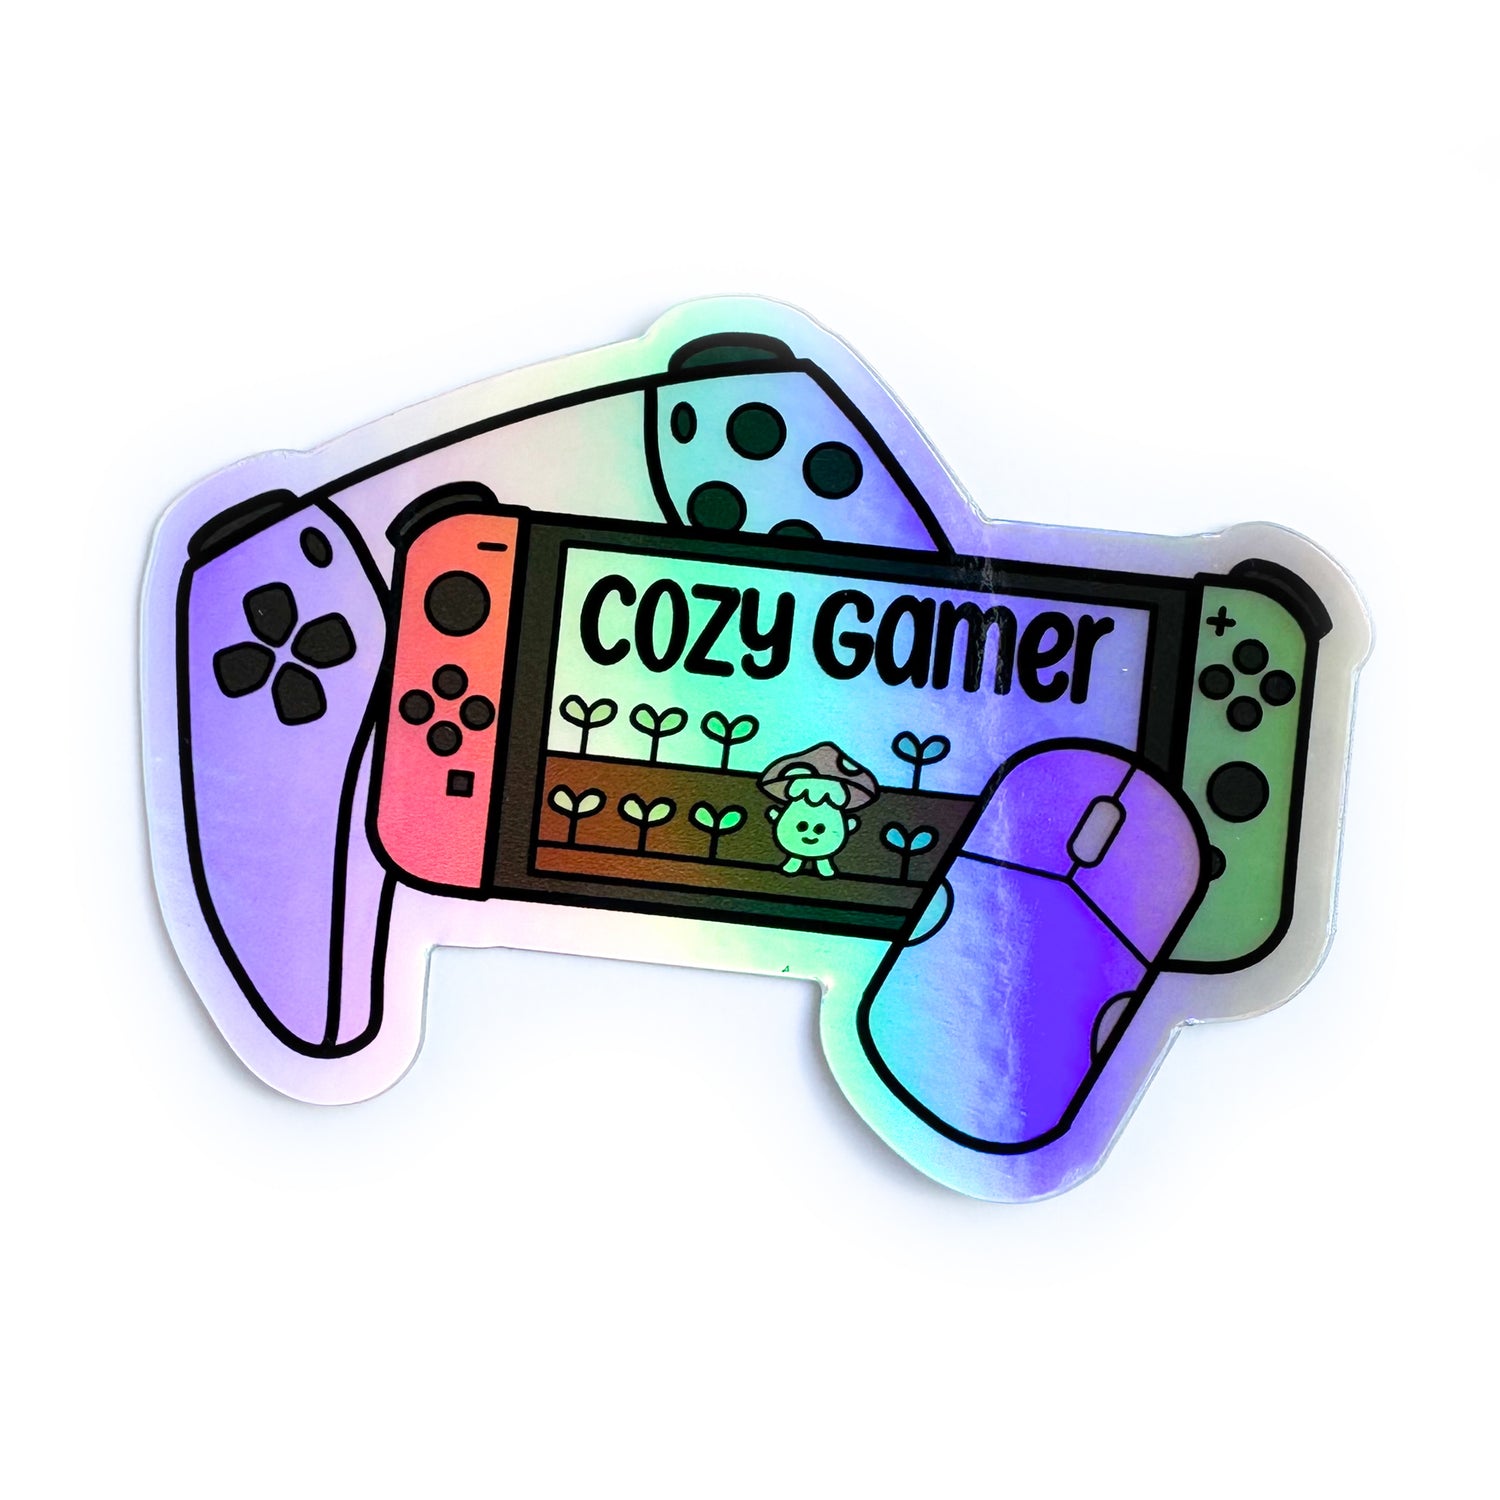 A holographic sticker on a white background shaped like a Nintendo switch, playstation controller and mouse that reads "Cozy Gamer"